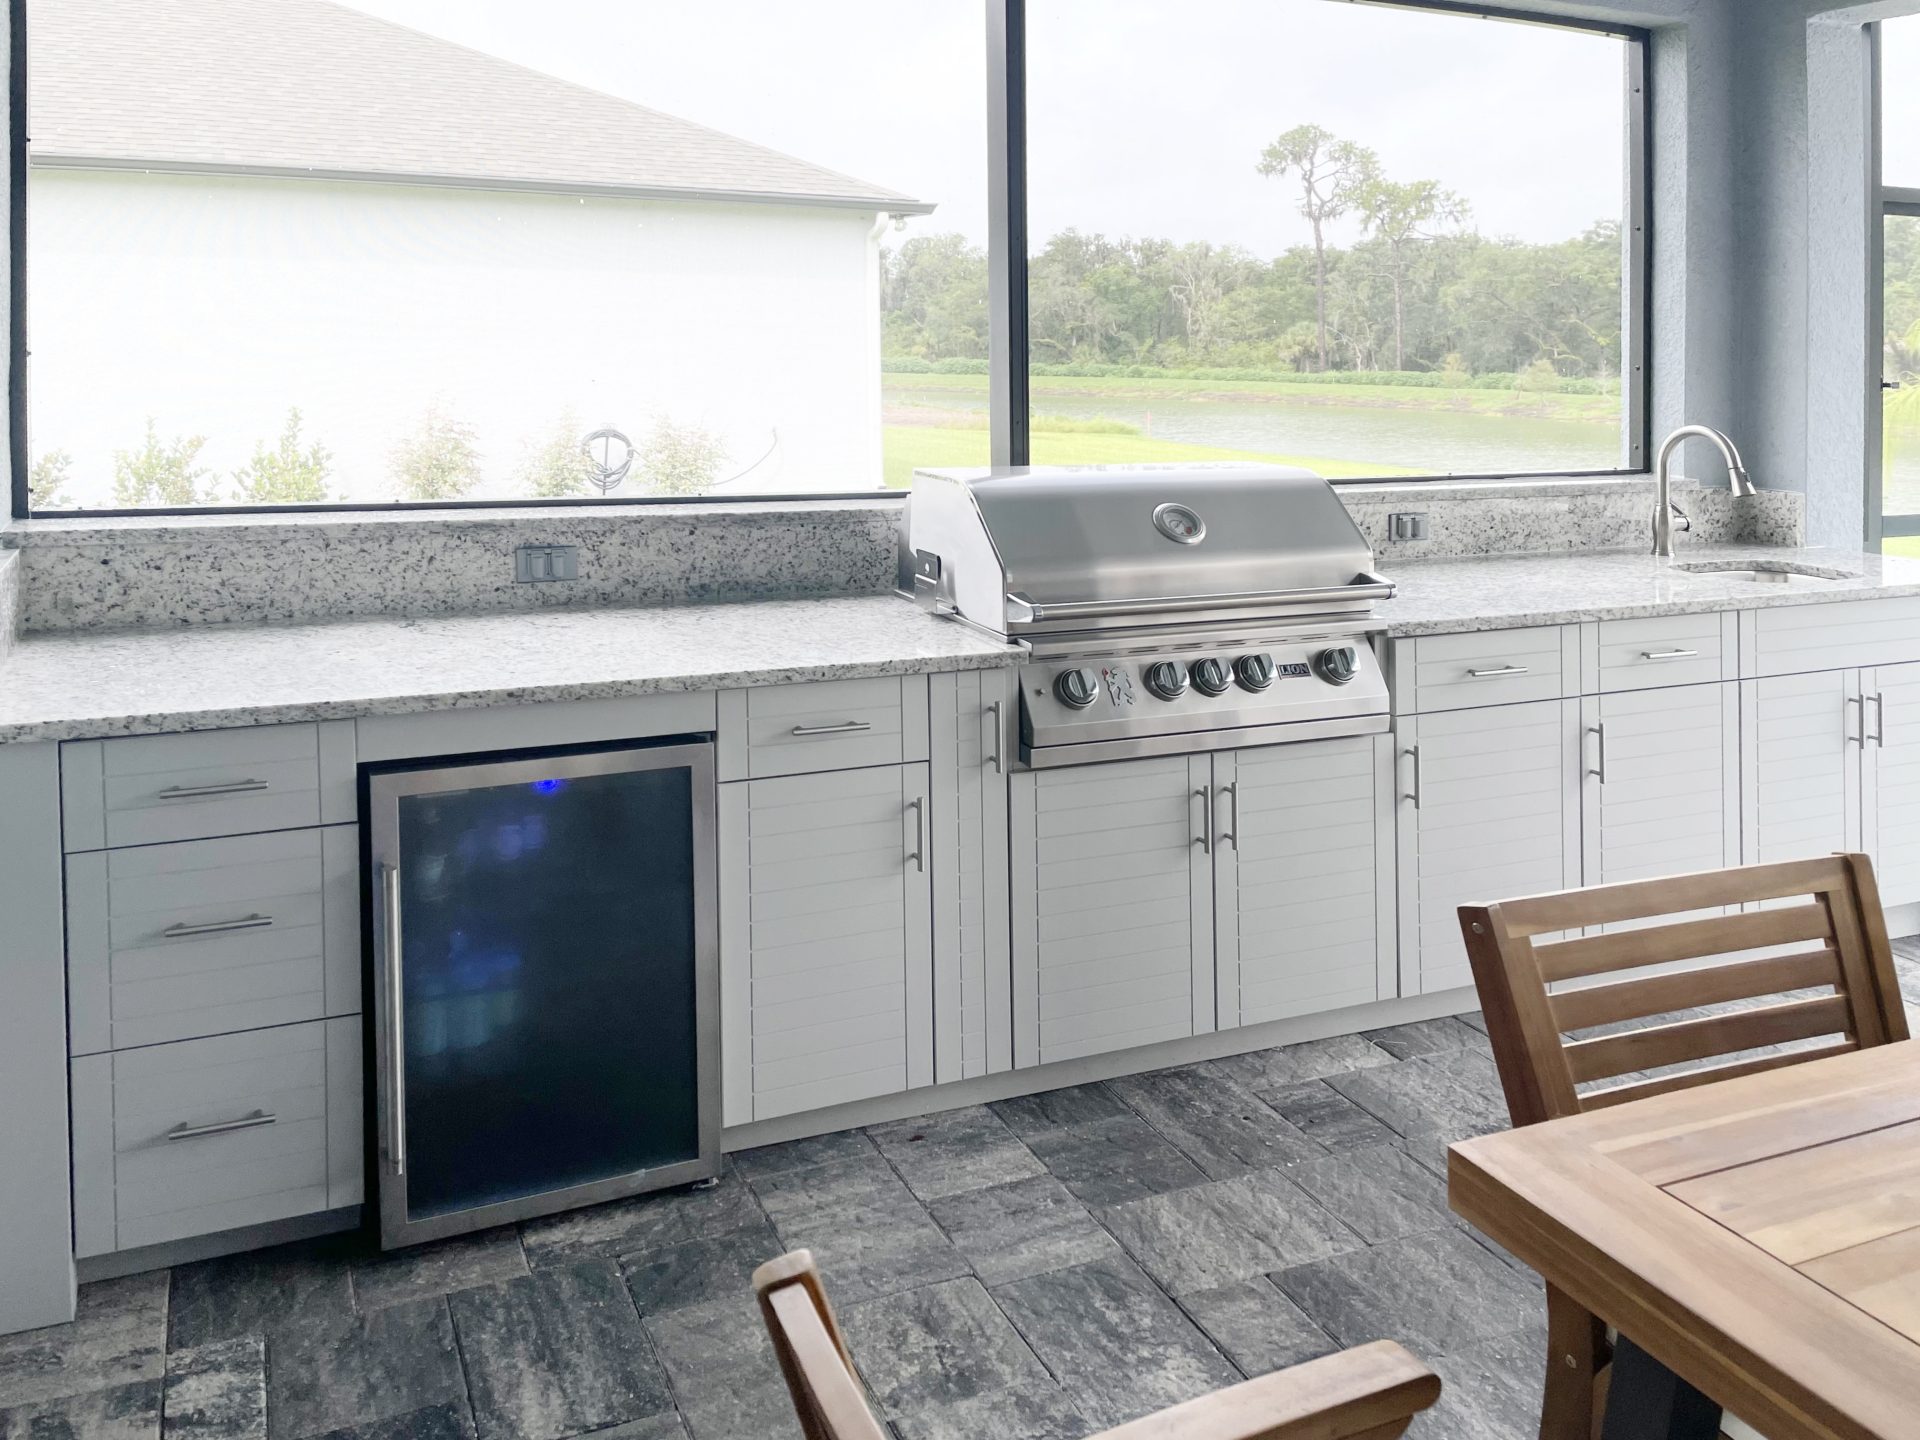 OUTDOOR KITCHEN 5. Custom outdoor kitchen in Parrish, FL. Kitchen features dolphin grey, cabana style cabinets. Appliances include Lion grill, glass front refrigerator and stainless bar pulls.